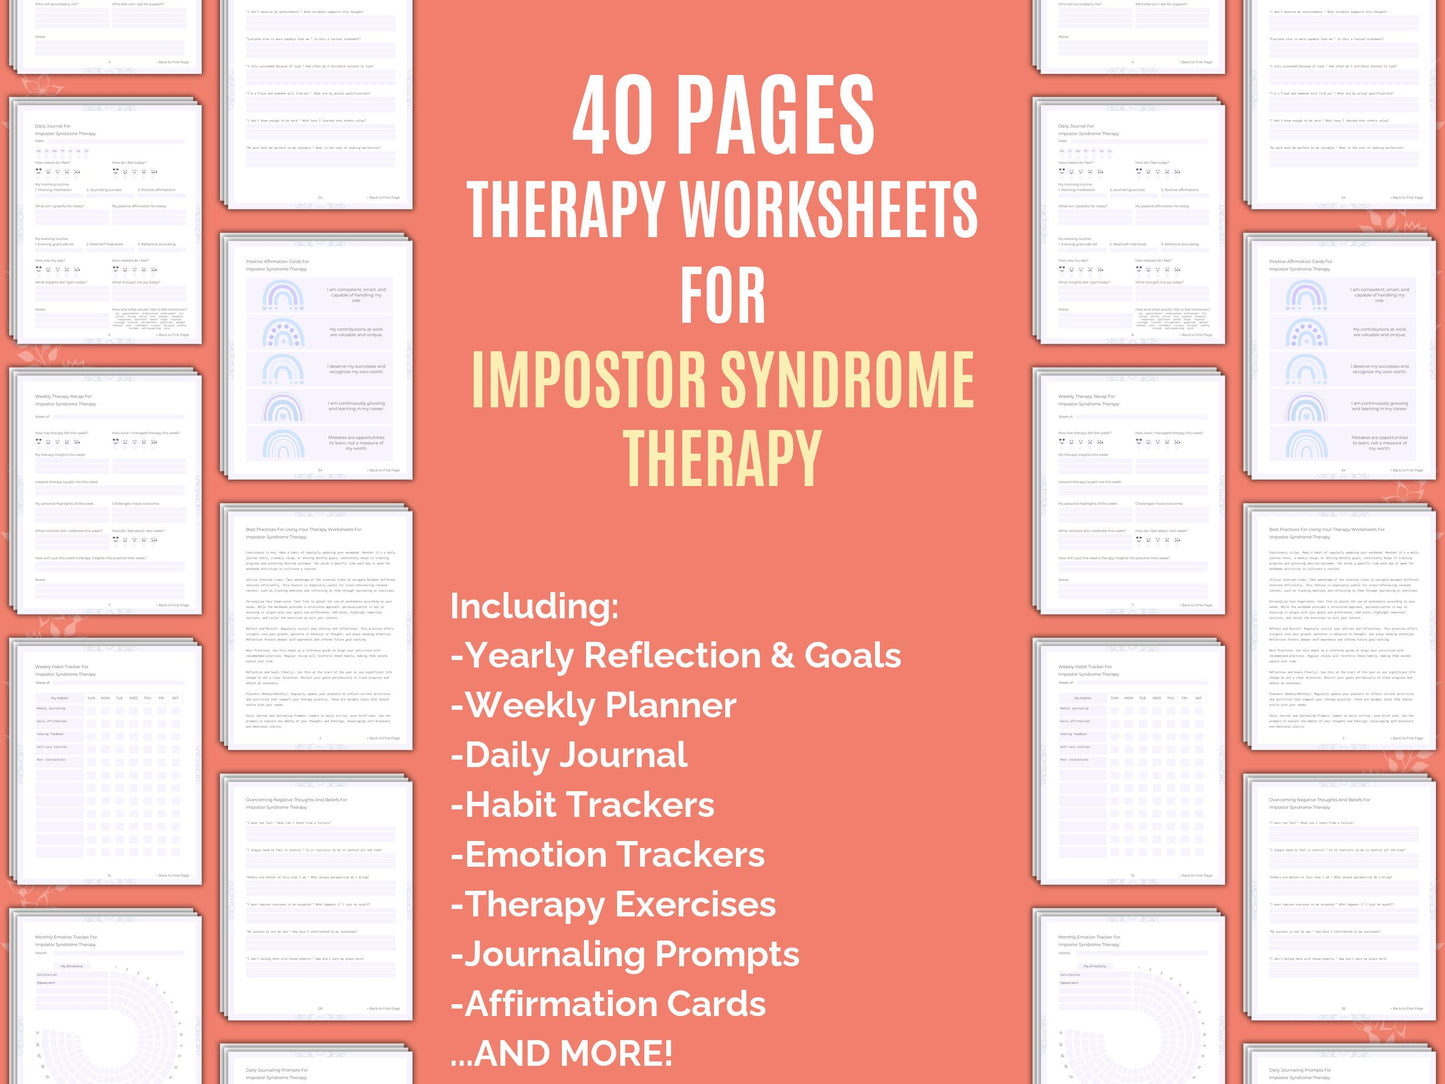 Therapy, Journaling, Workbooks, Journals, Templates, Goal Setting, Resources, Notes, Counseling, Tools, Planners, Impostor Syndrome Therapy, Cheat Sheet